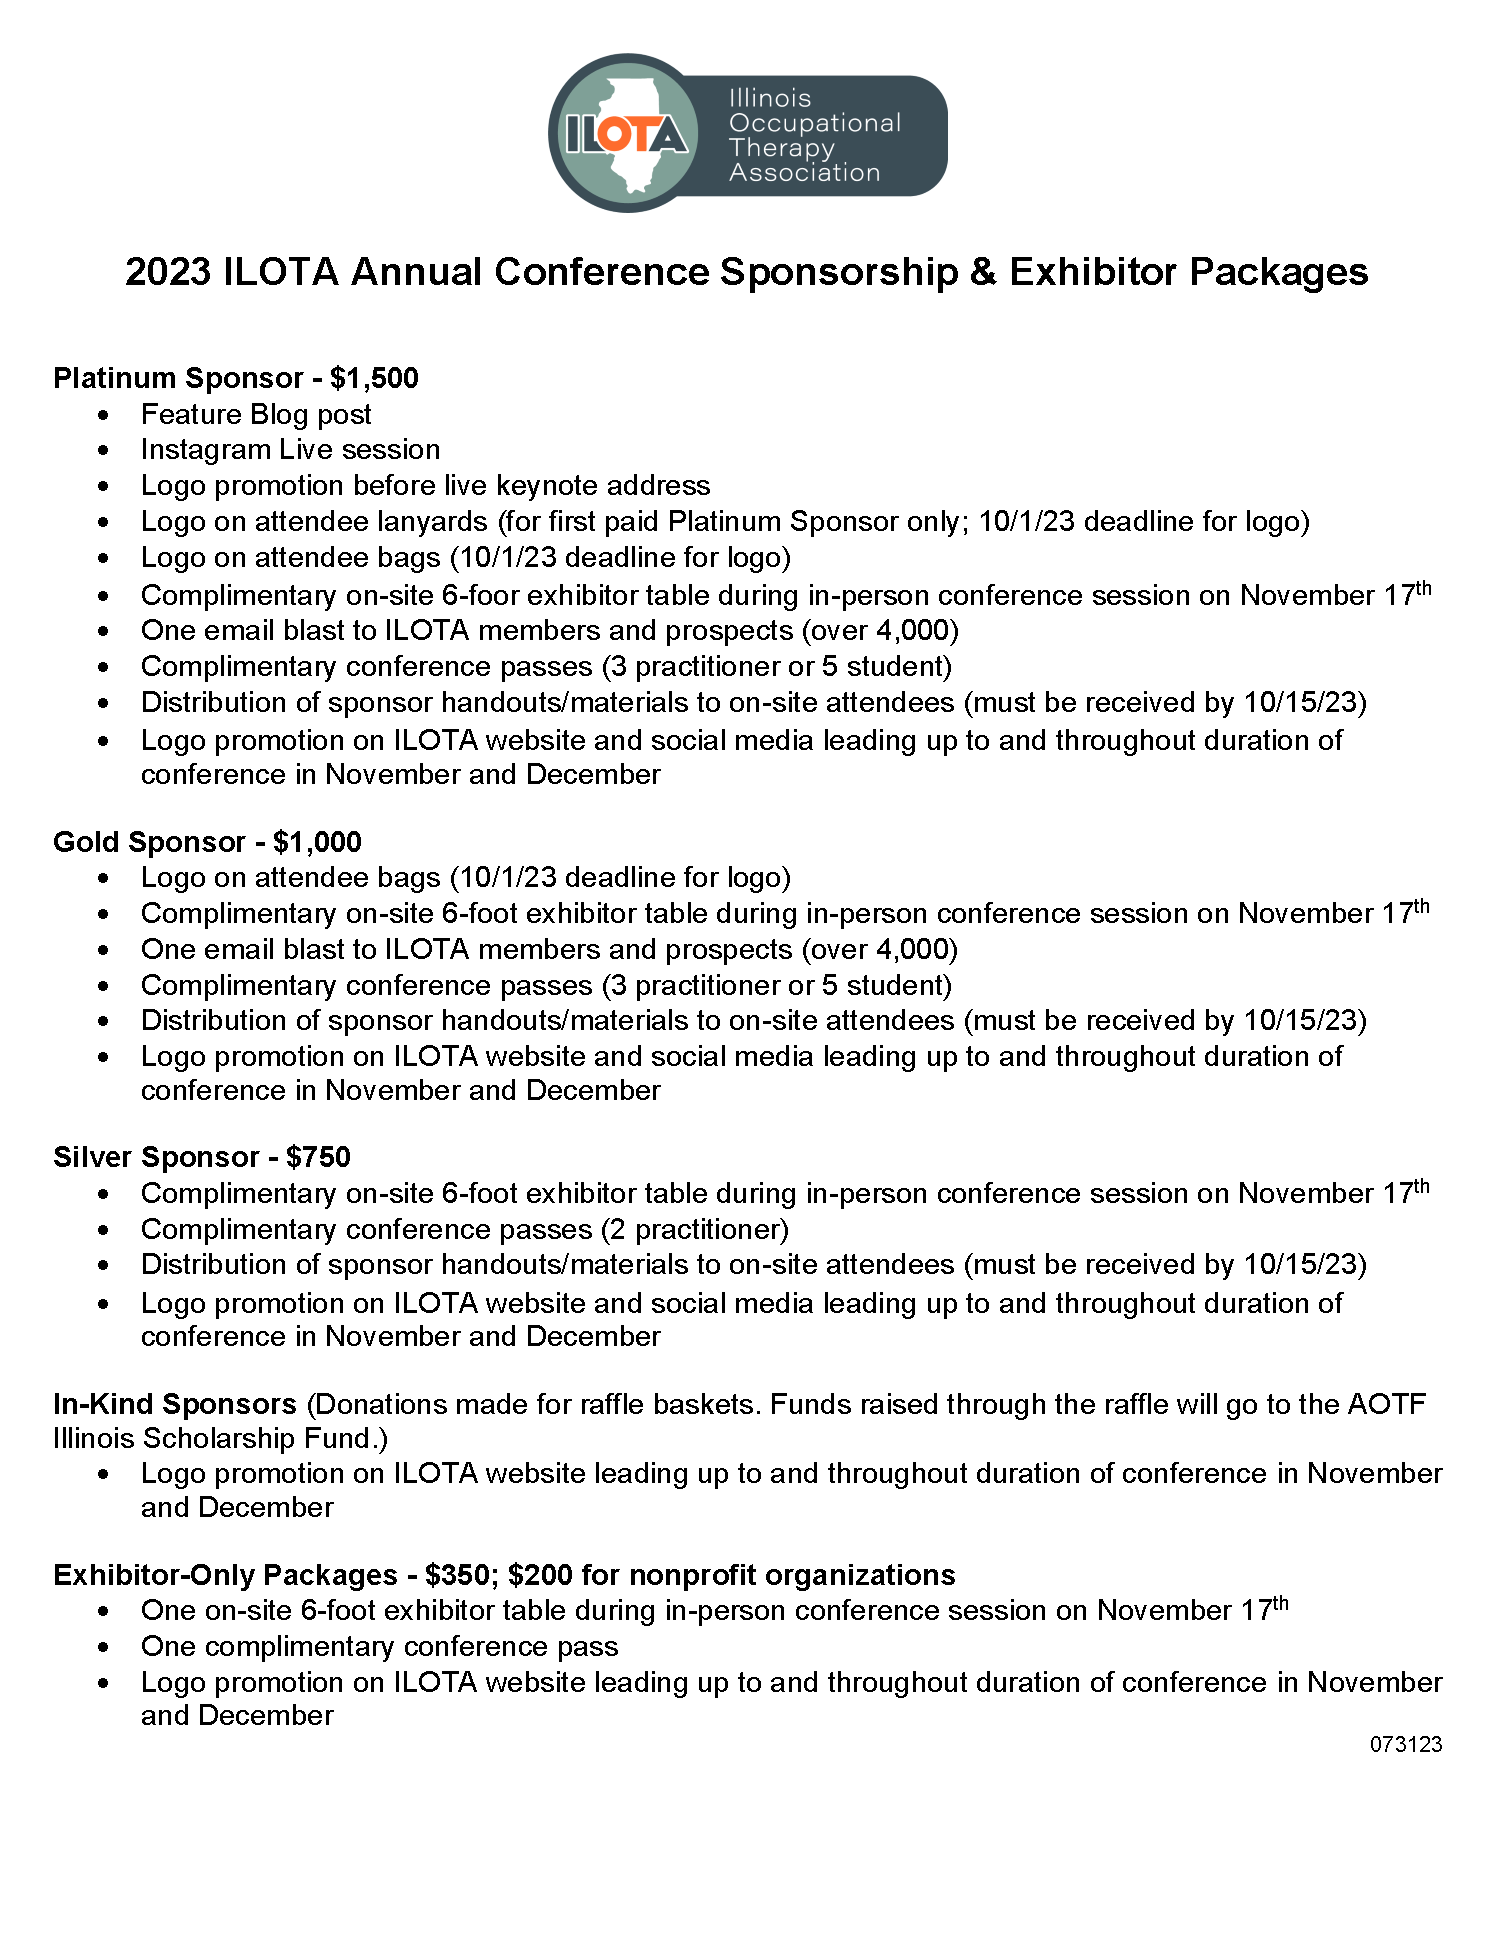 Image of sponsorship and exhibitor packages